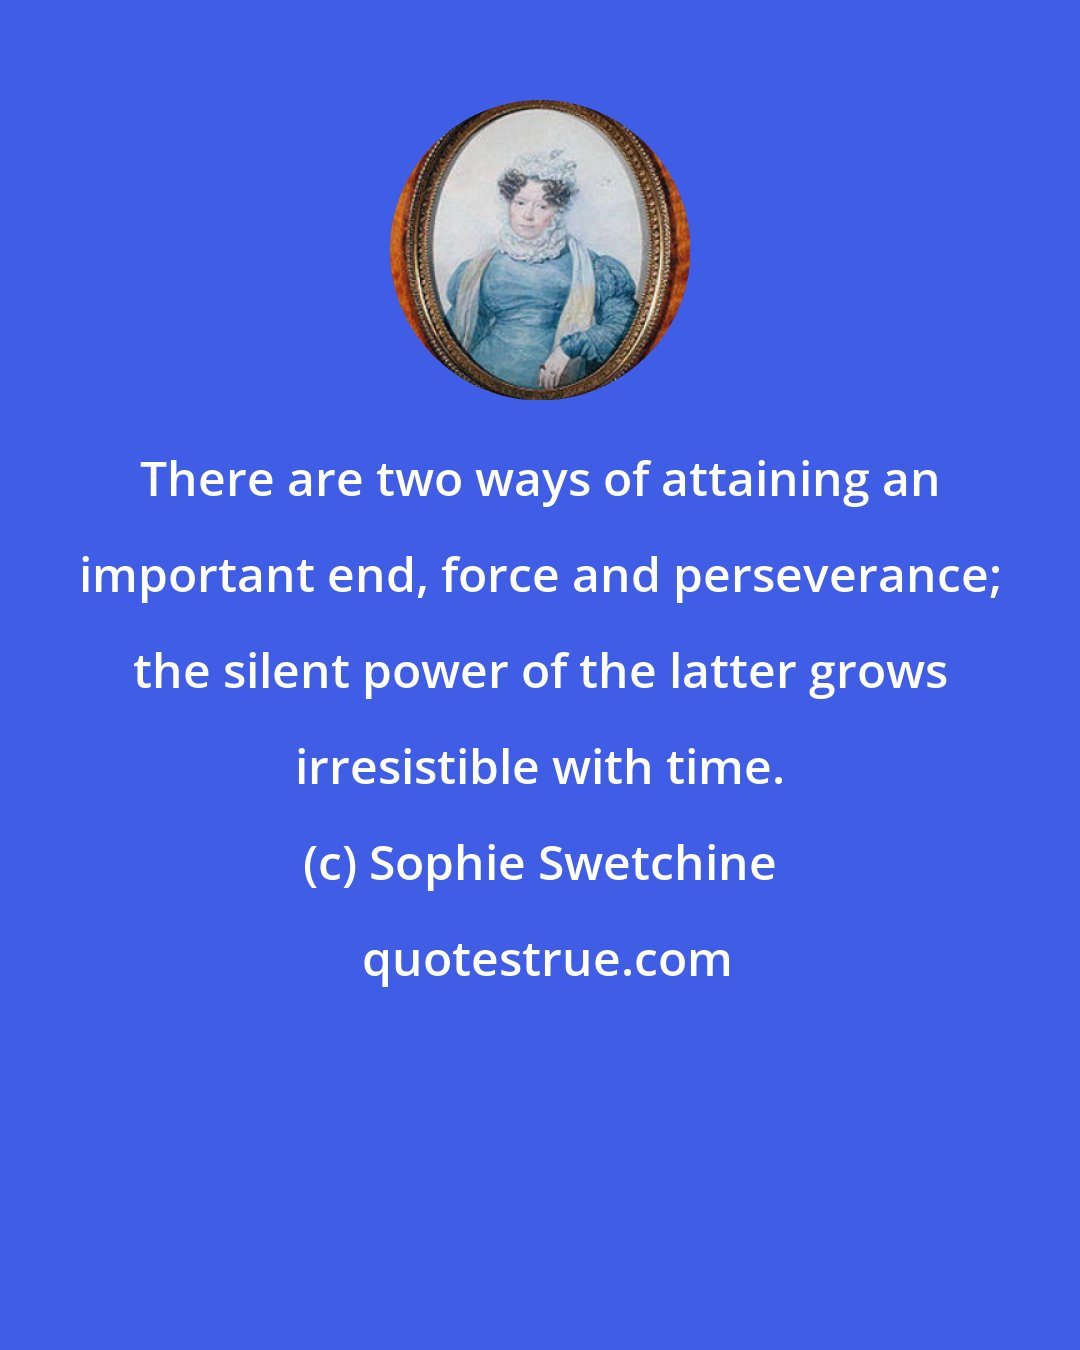 Sophie Swetchine: There are two ways of attaining an important end, force and perseverance; the silent power of the latter grows irresistible with time.